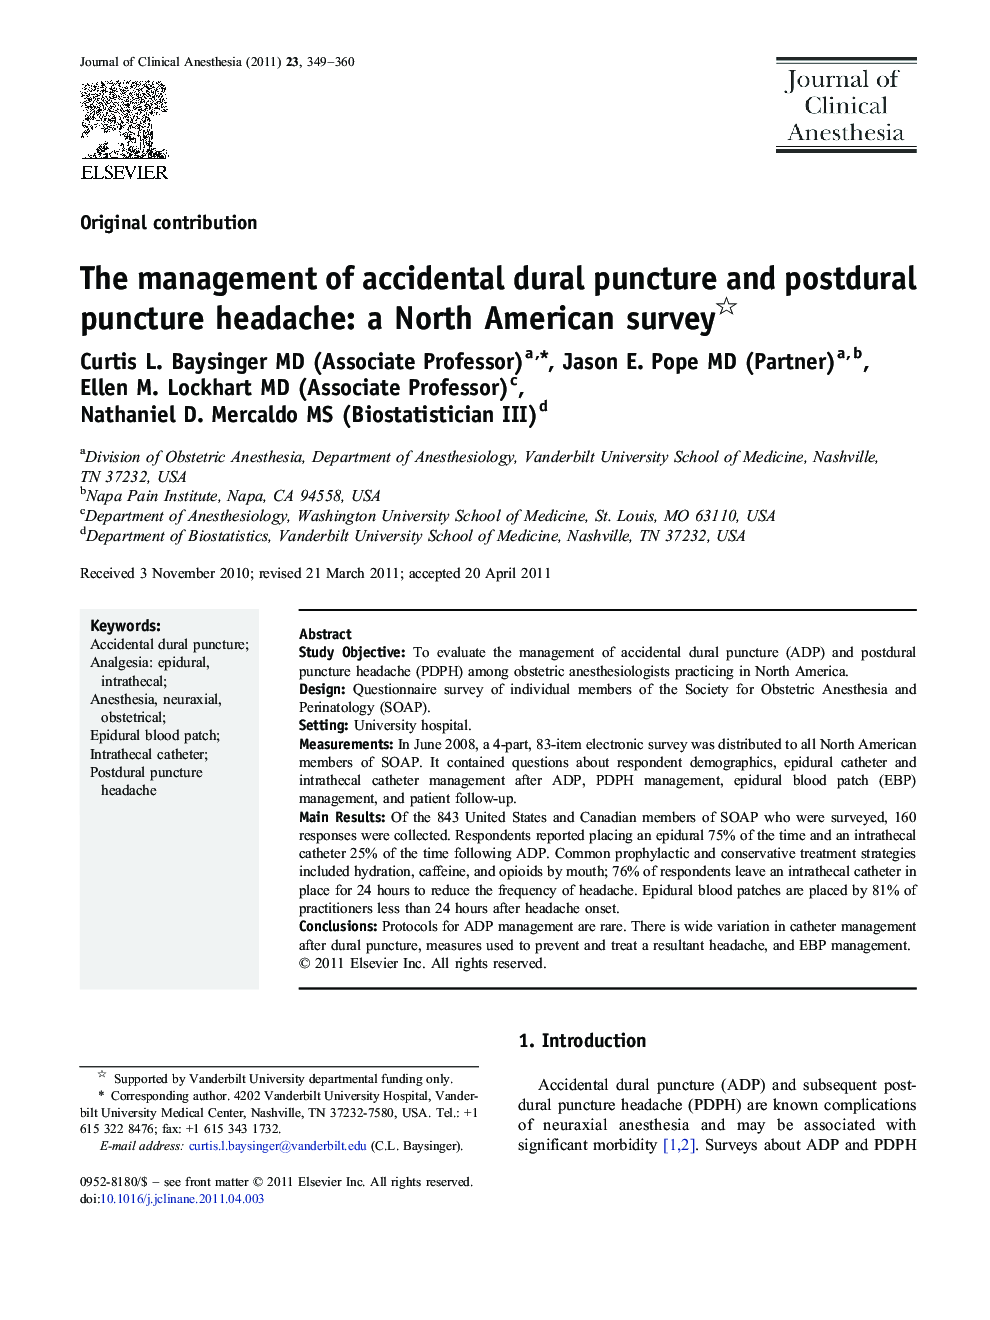 The management of accidental dural puncture and postdural puncture headache: a North American survey 